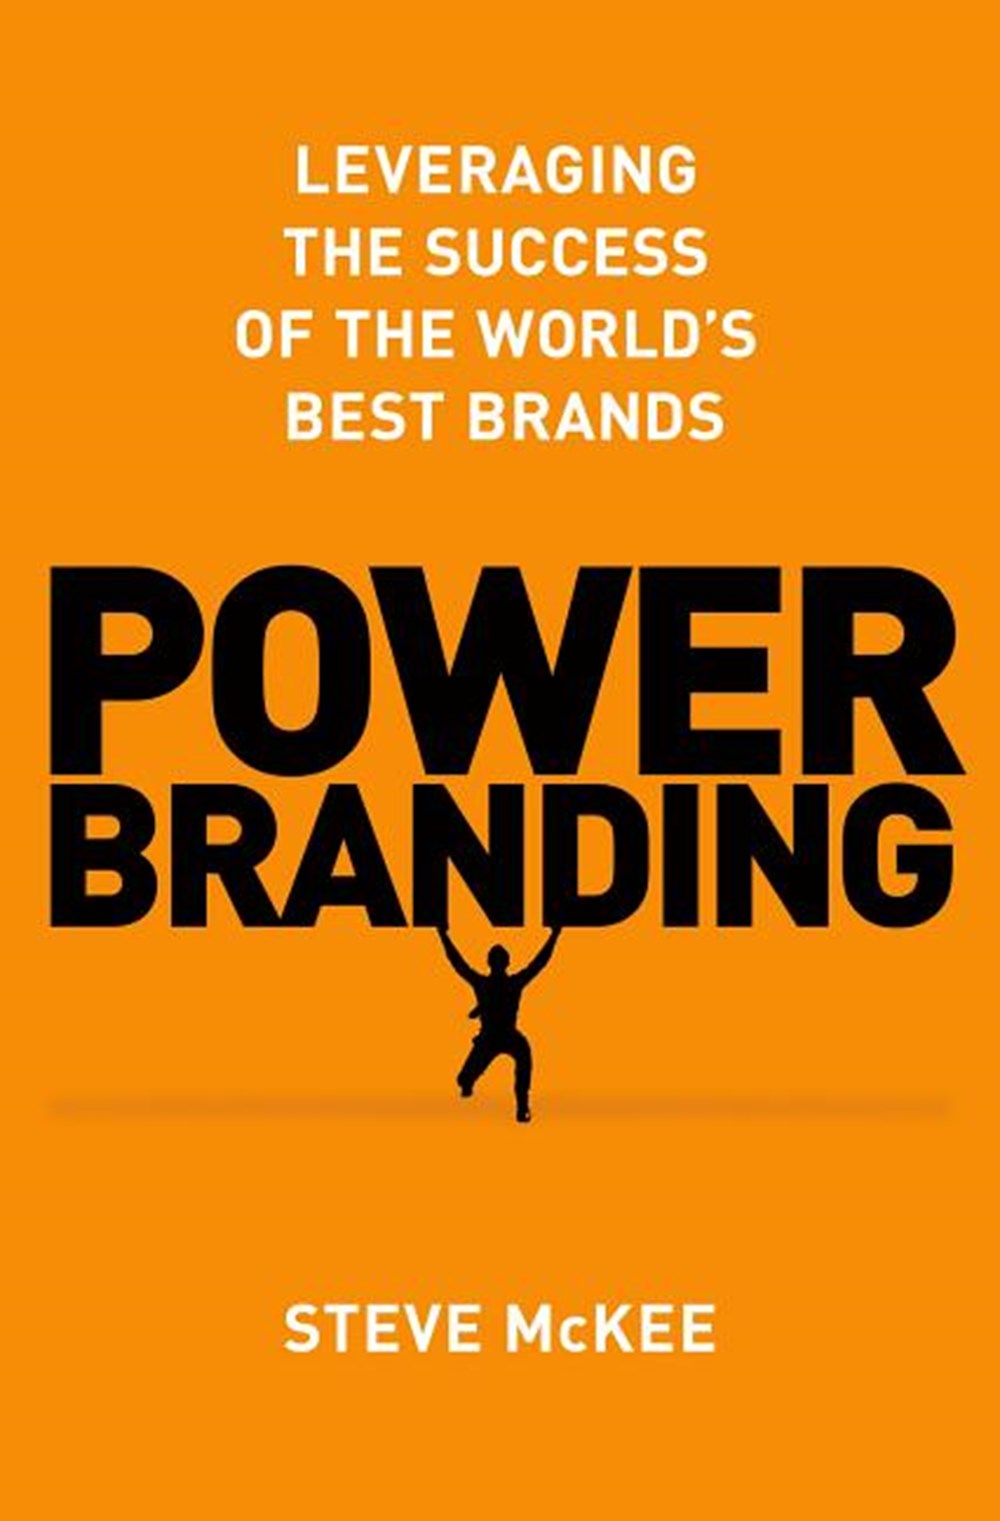 Power Branding Leveraging the Success of the World's Best Brands